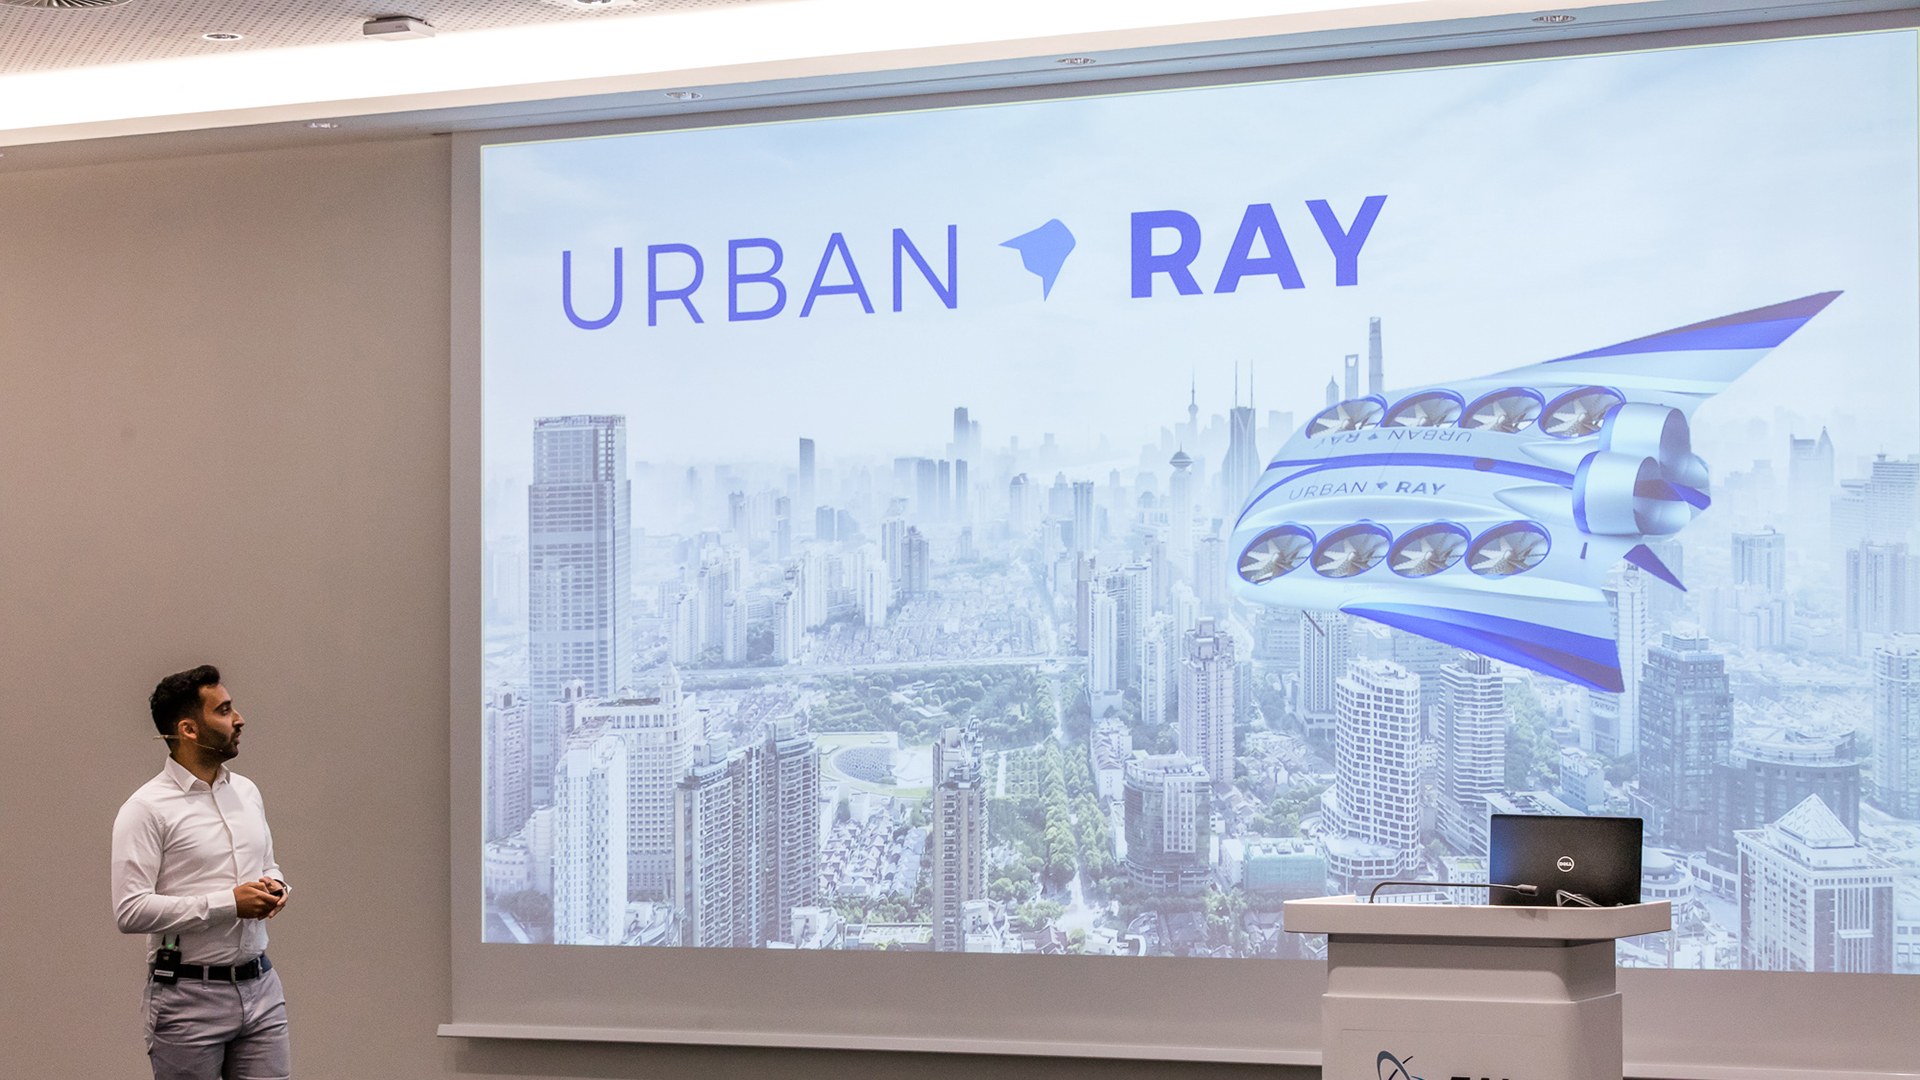 Presentation of the ‘Urban Ray’ concept